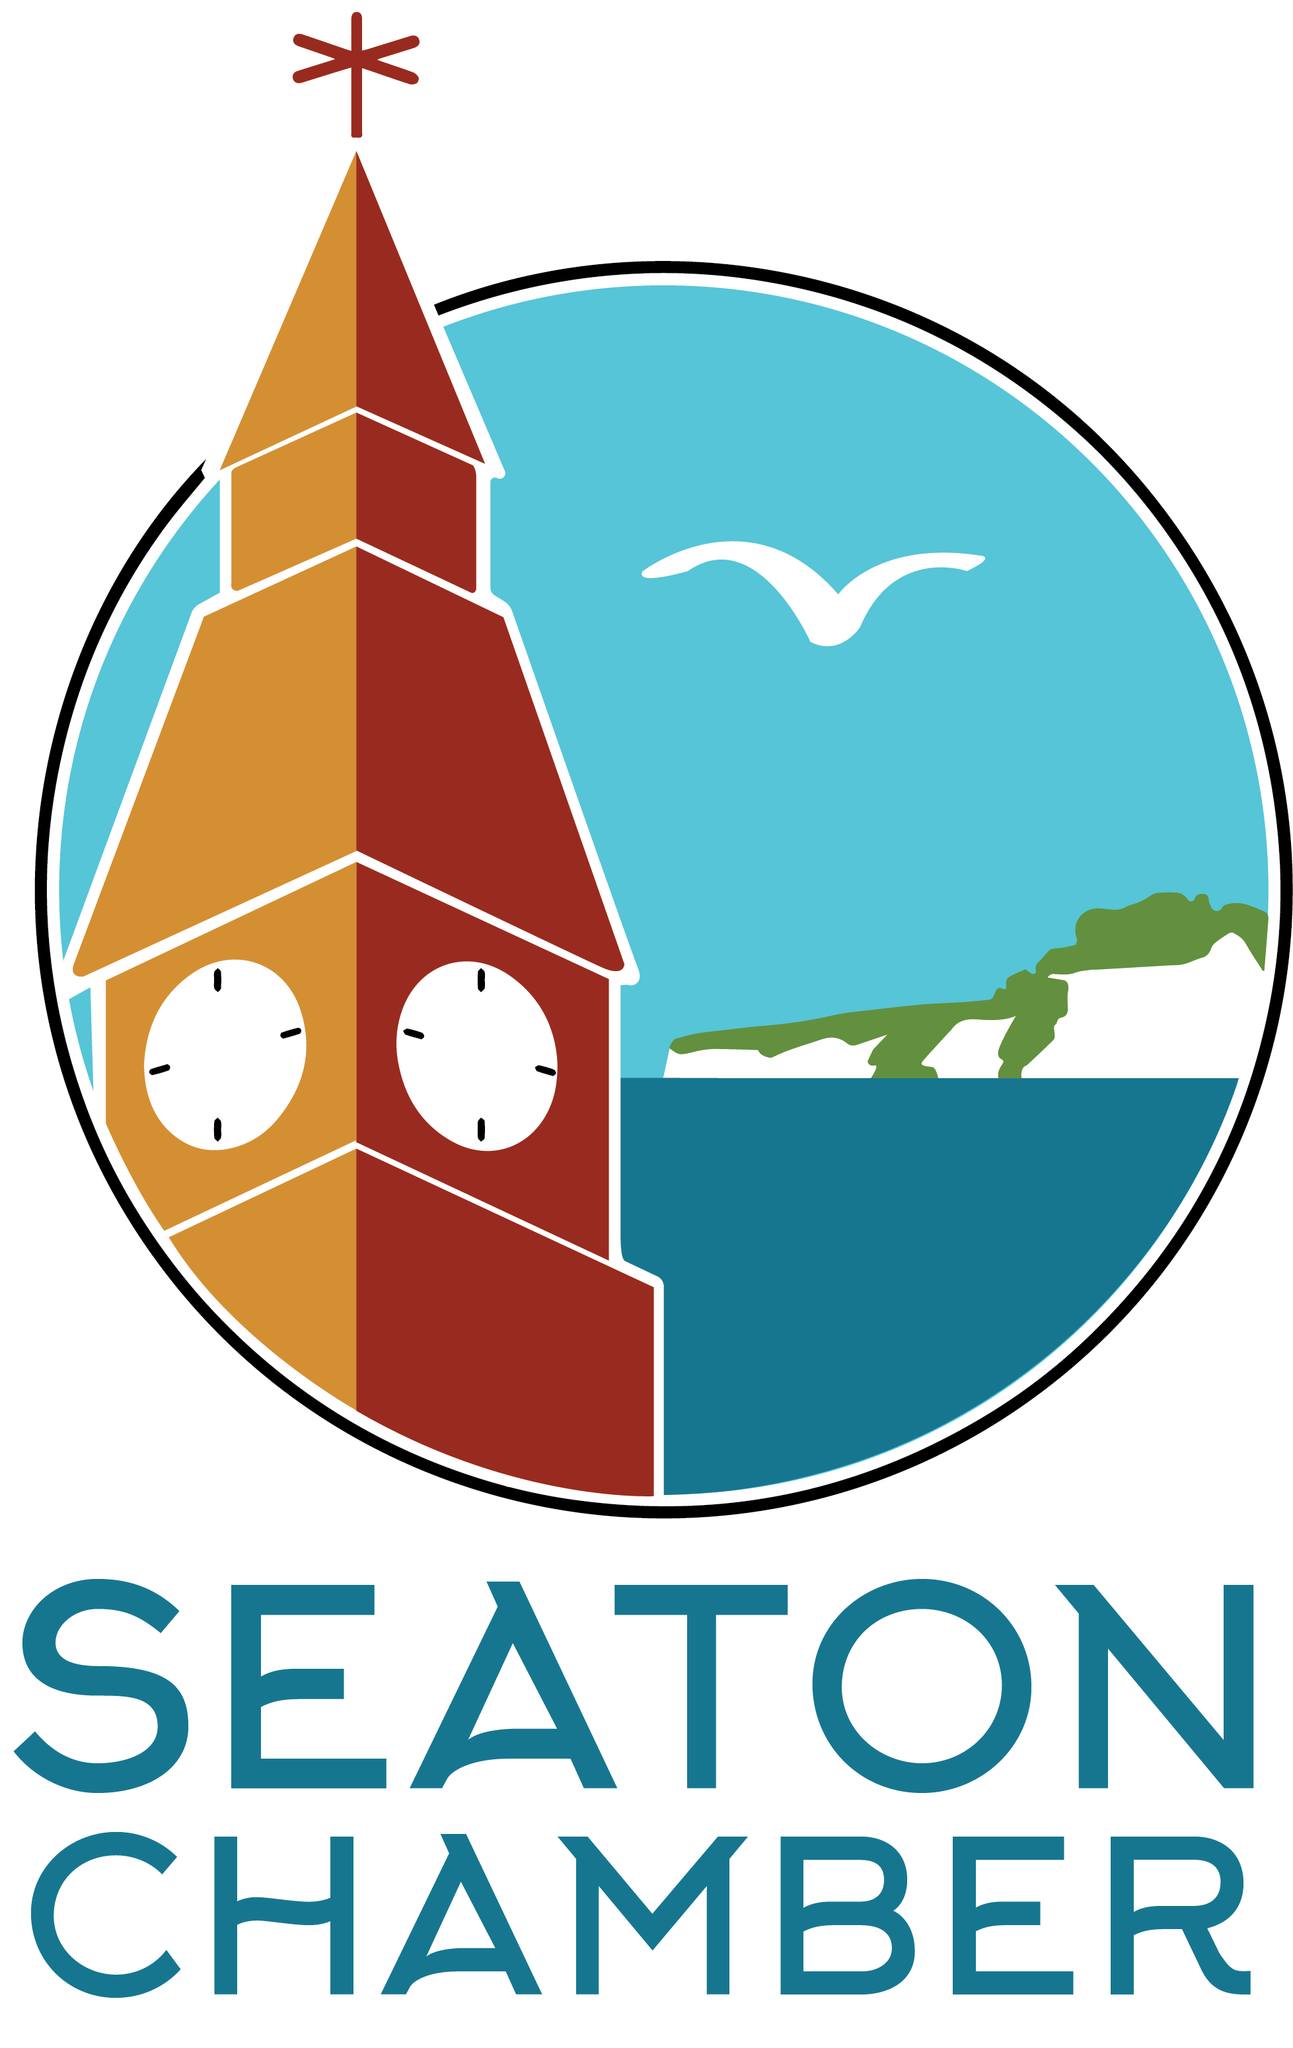 Seaton Chamber has now been officially launched